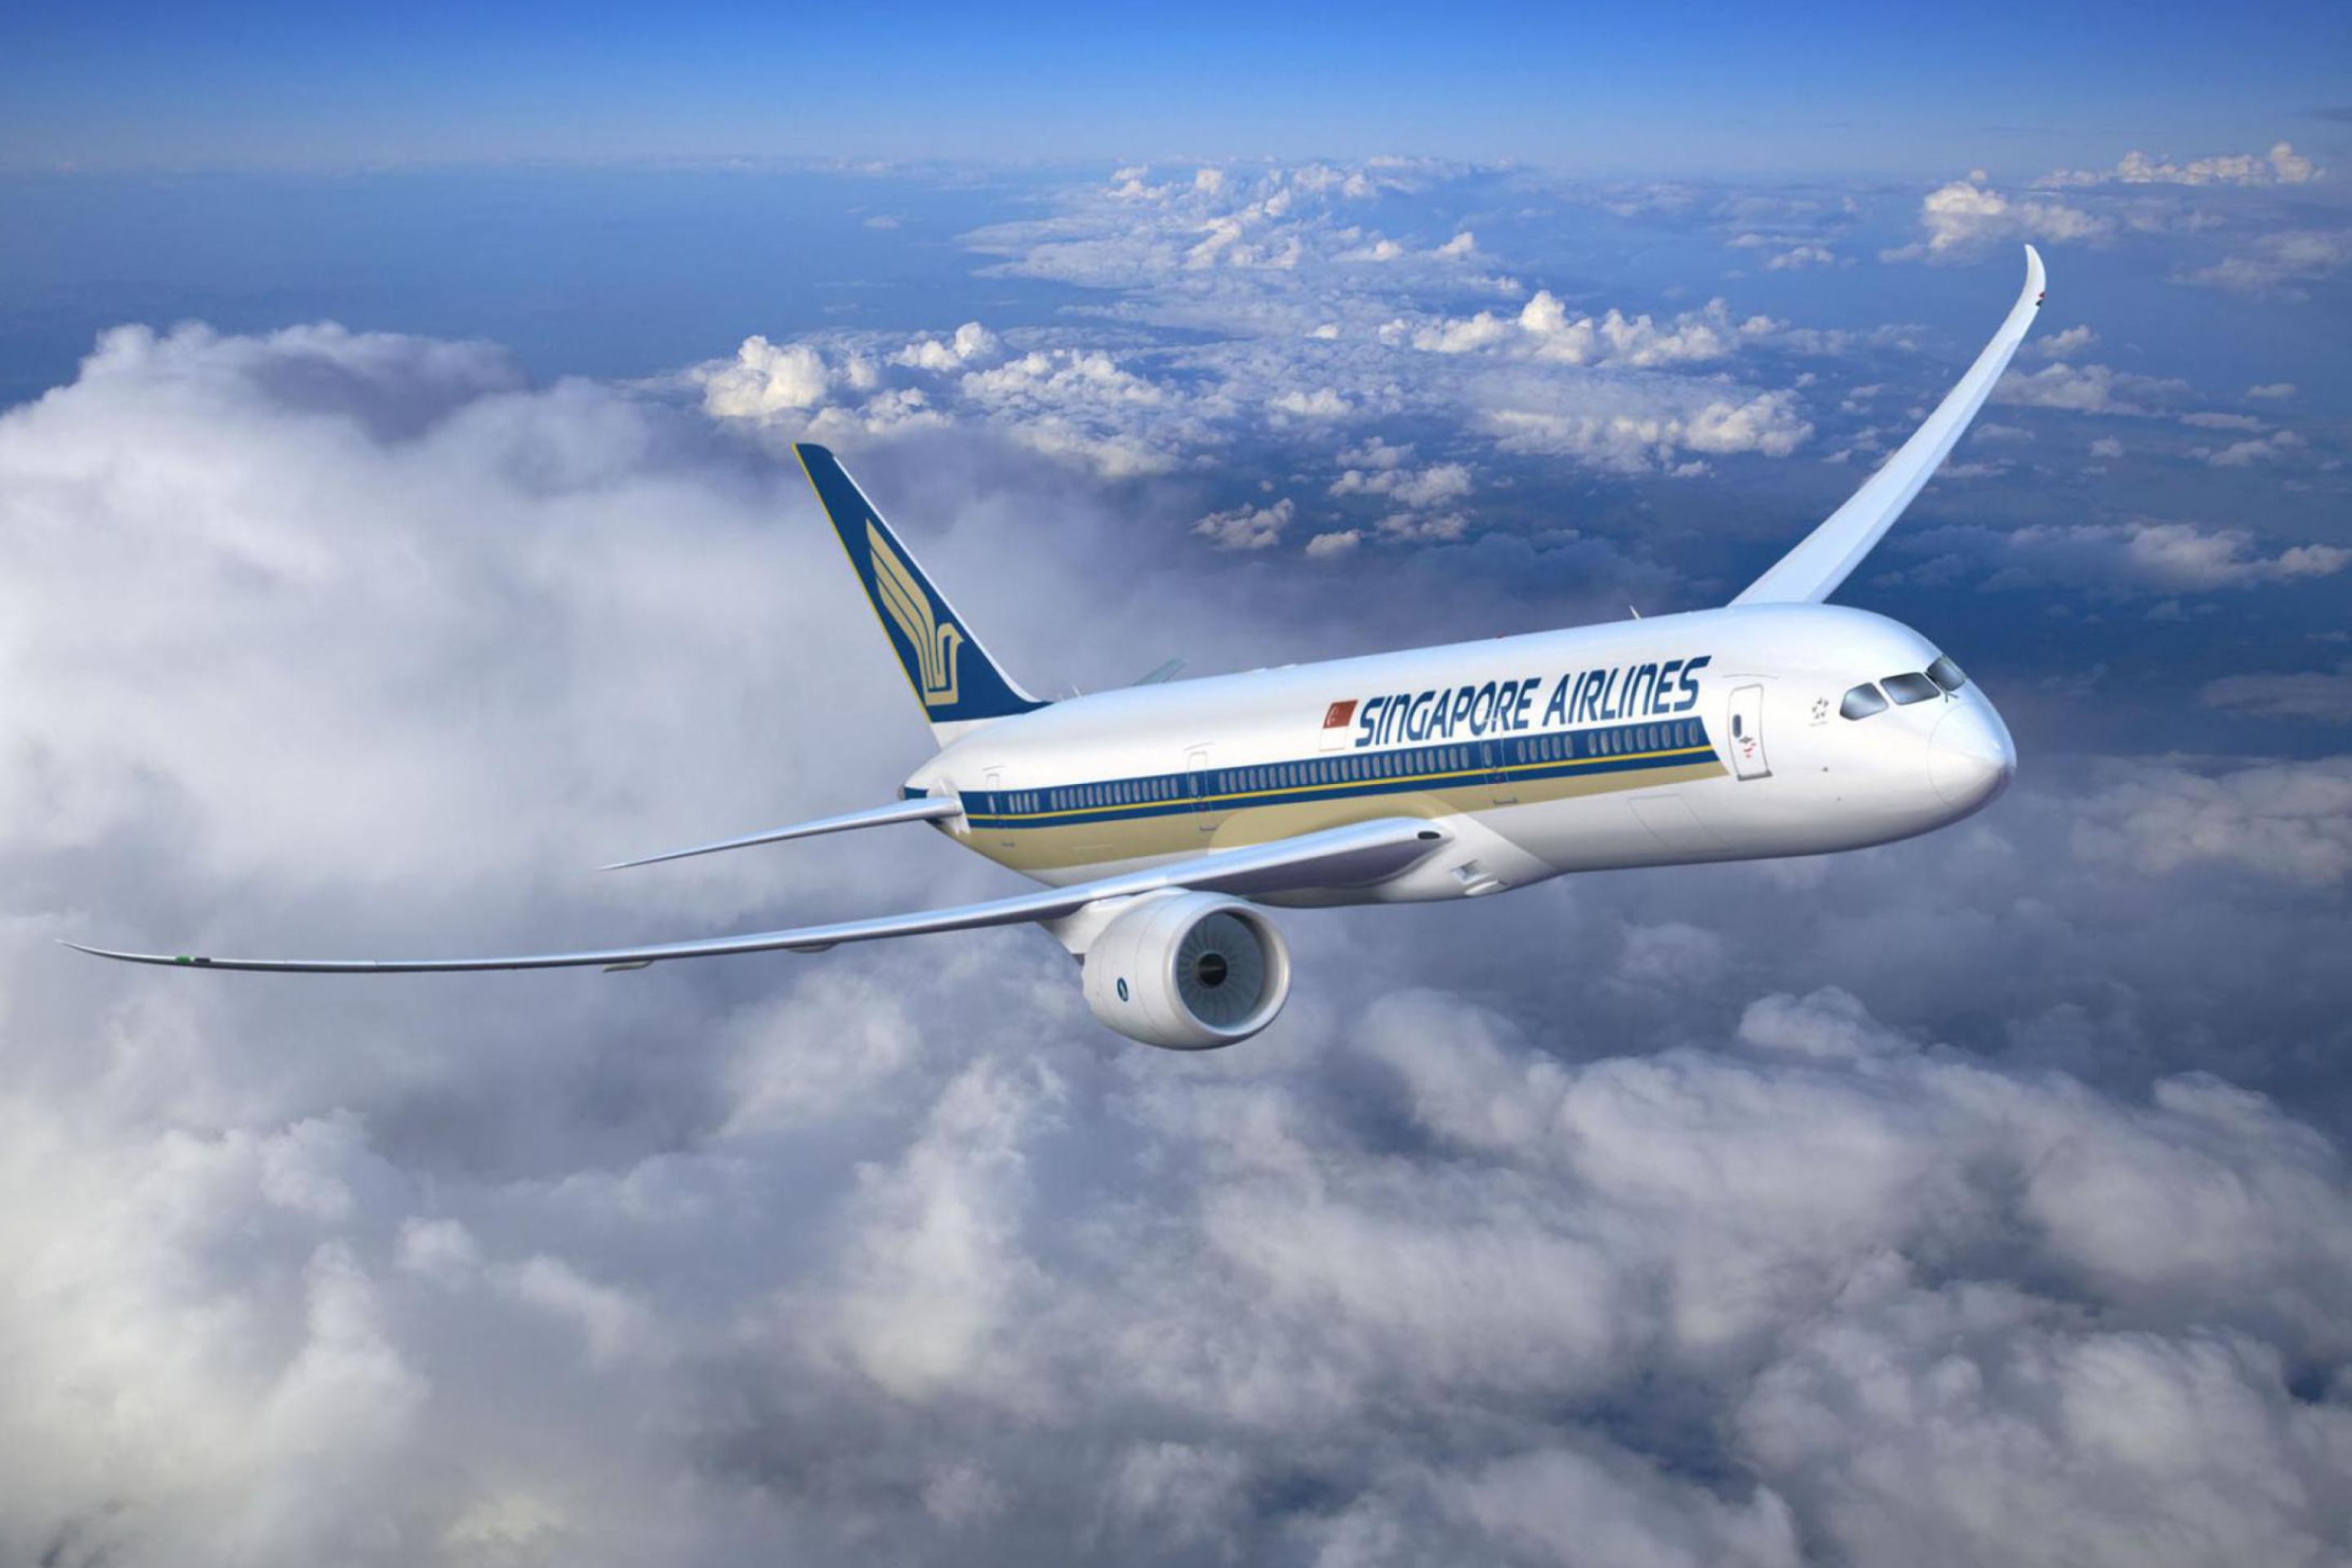 Singapore Airlines wallpaper 2880x1920